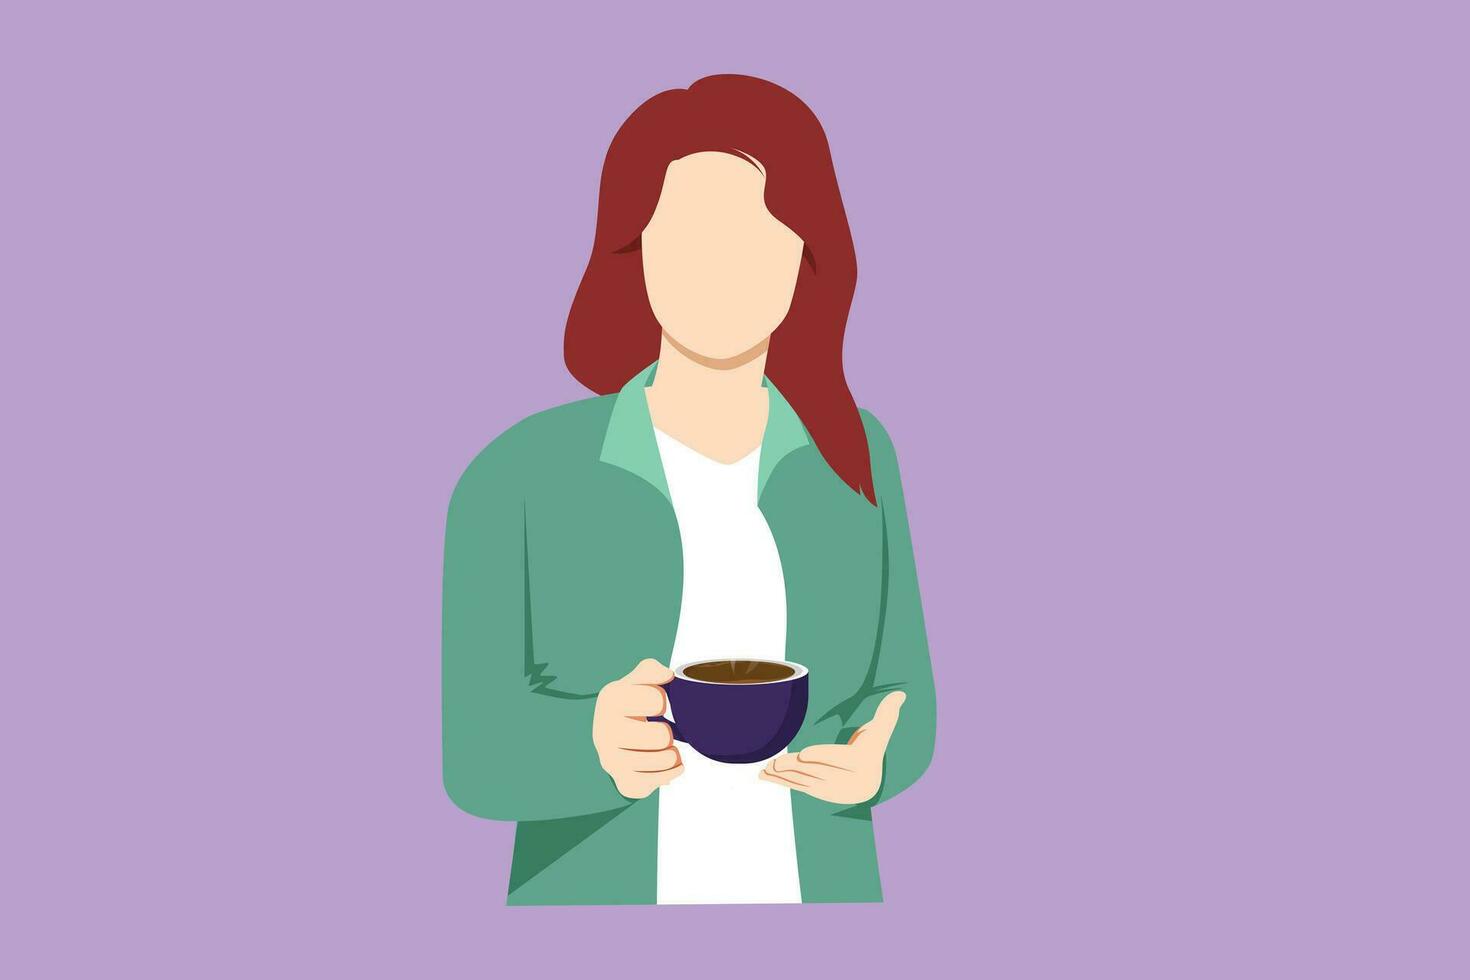 Cartoon flat style drawing of beautiful business woman holding and showing coffee cup sitting in the coffee shop. Business dress code. Enjoy relax time after office. Graphic design vector illustration